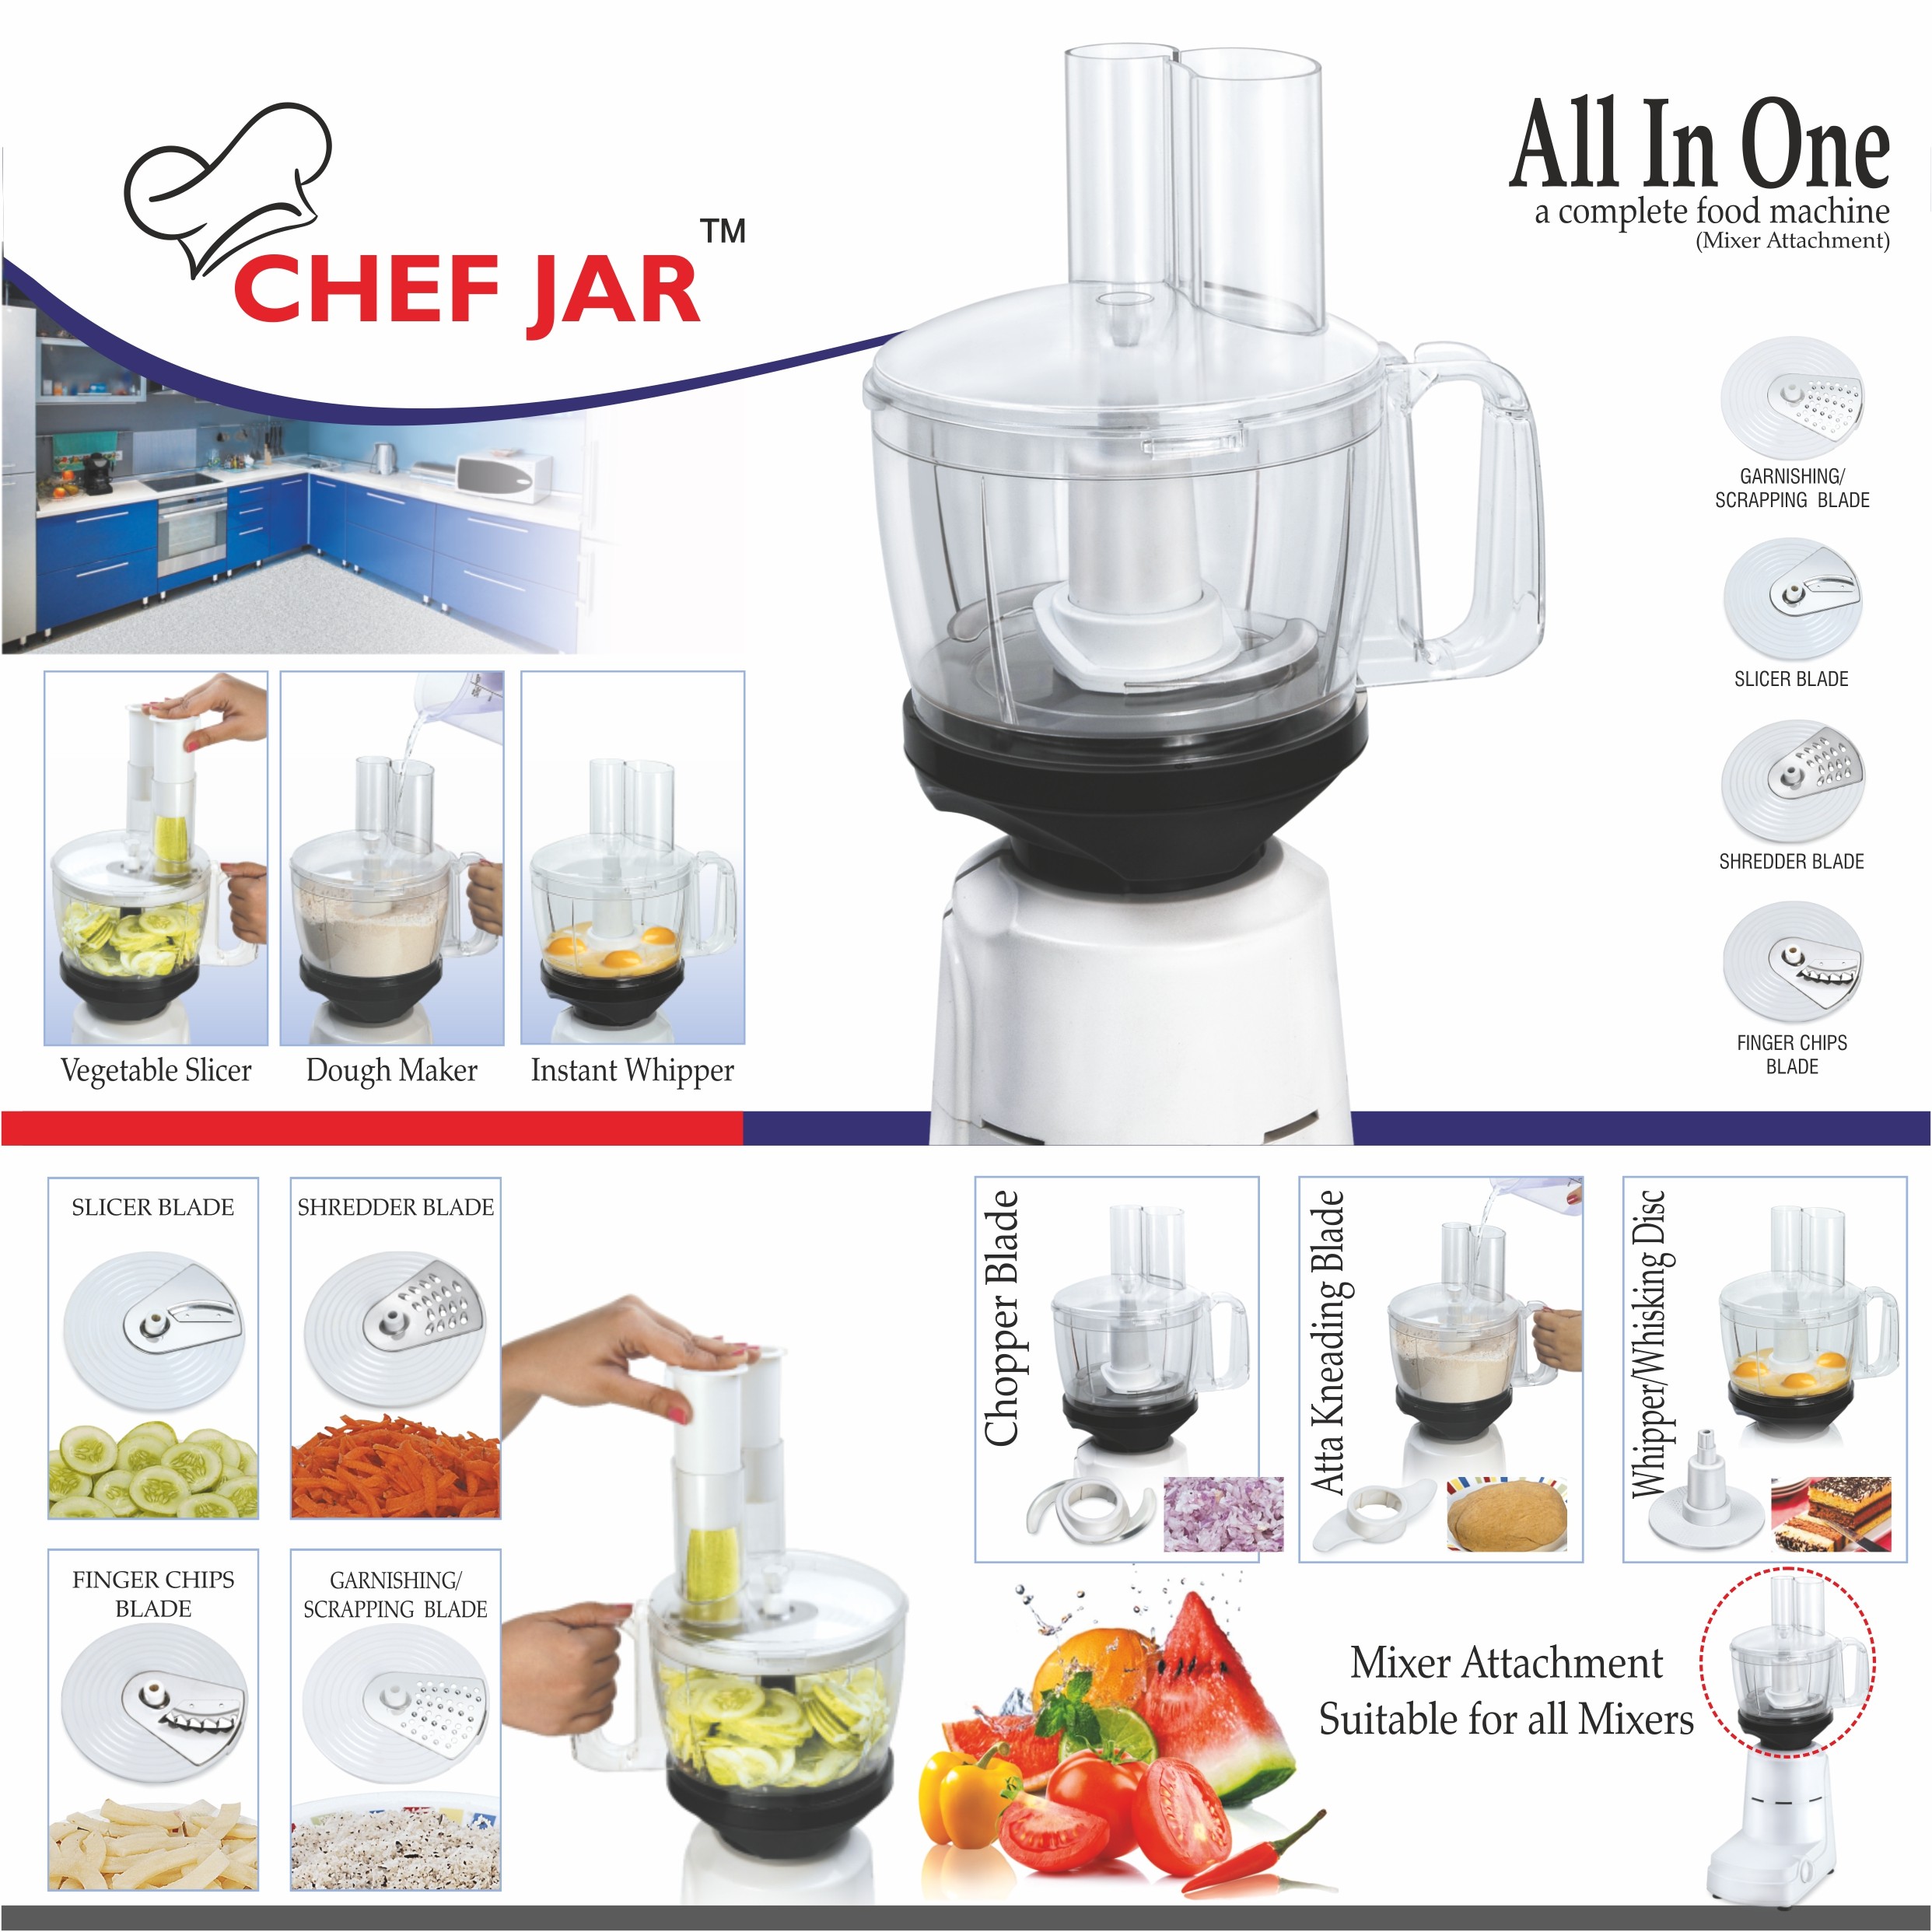 chef-jar-all-in-one-a-complete-food-processor-attachment-for-most-indian-mixer-grinders-compatible-with-all-preethi-premier-models-except-preethi-steele2